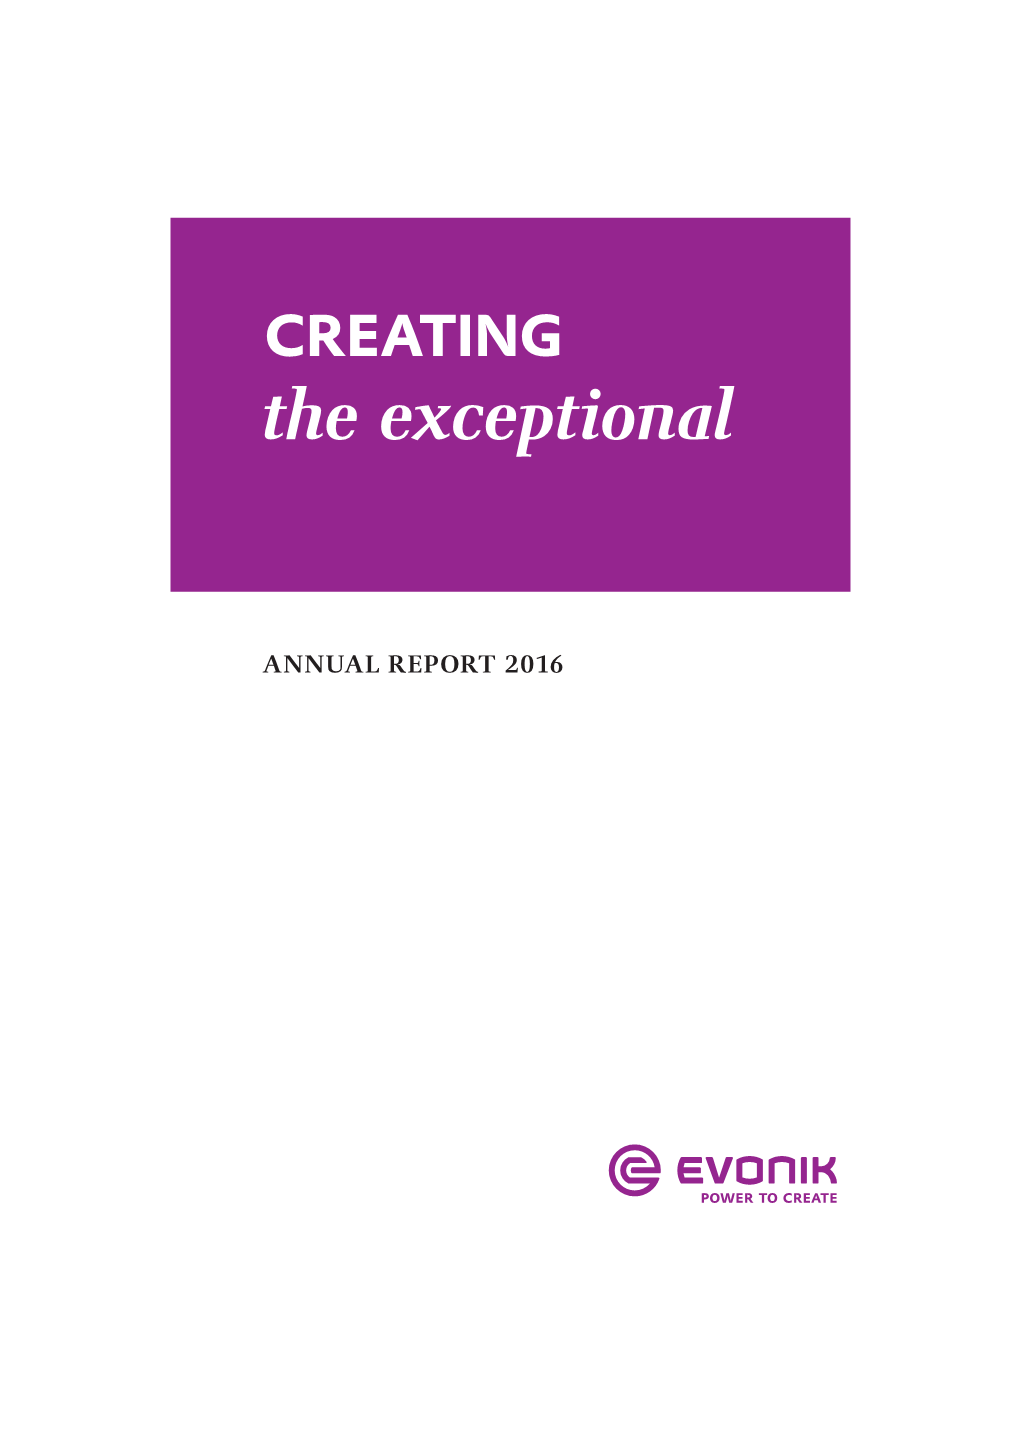 ANNUAL REPORT 2016 Key Figures for the Evonik Group